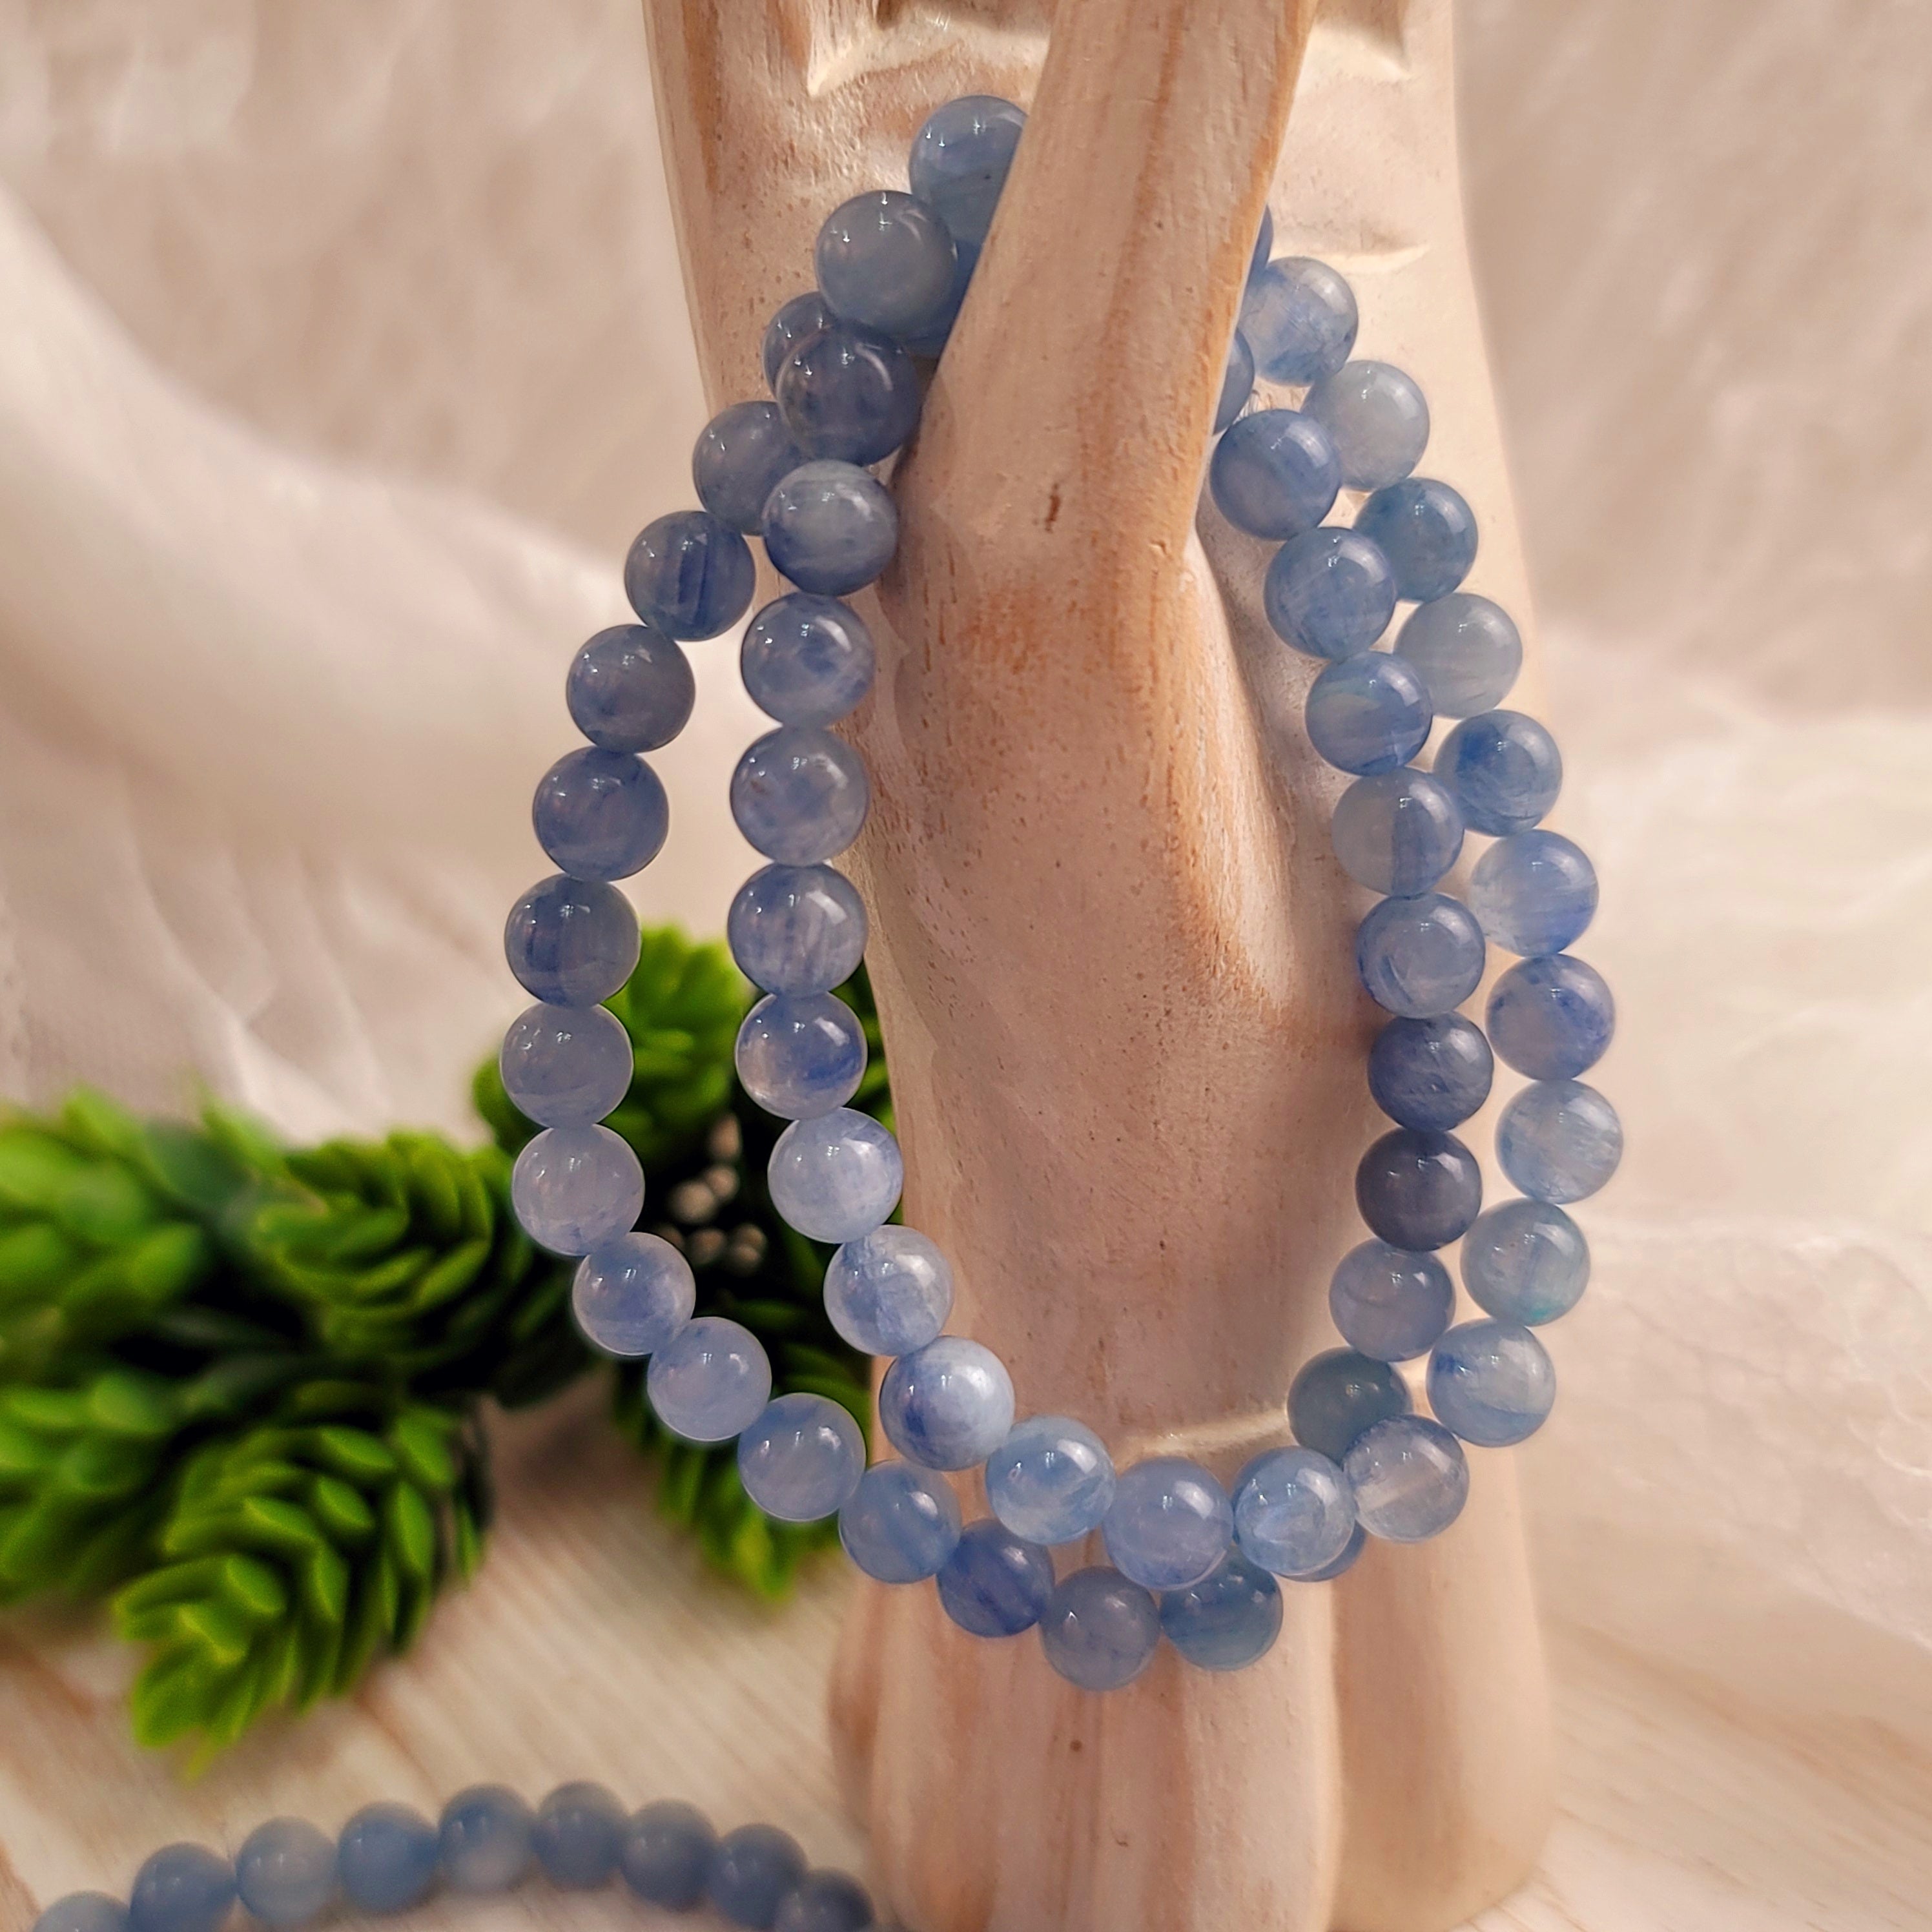 Baby Blue Kyanite Bracelet for Harmony and Overcoming Addiction